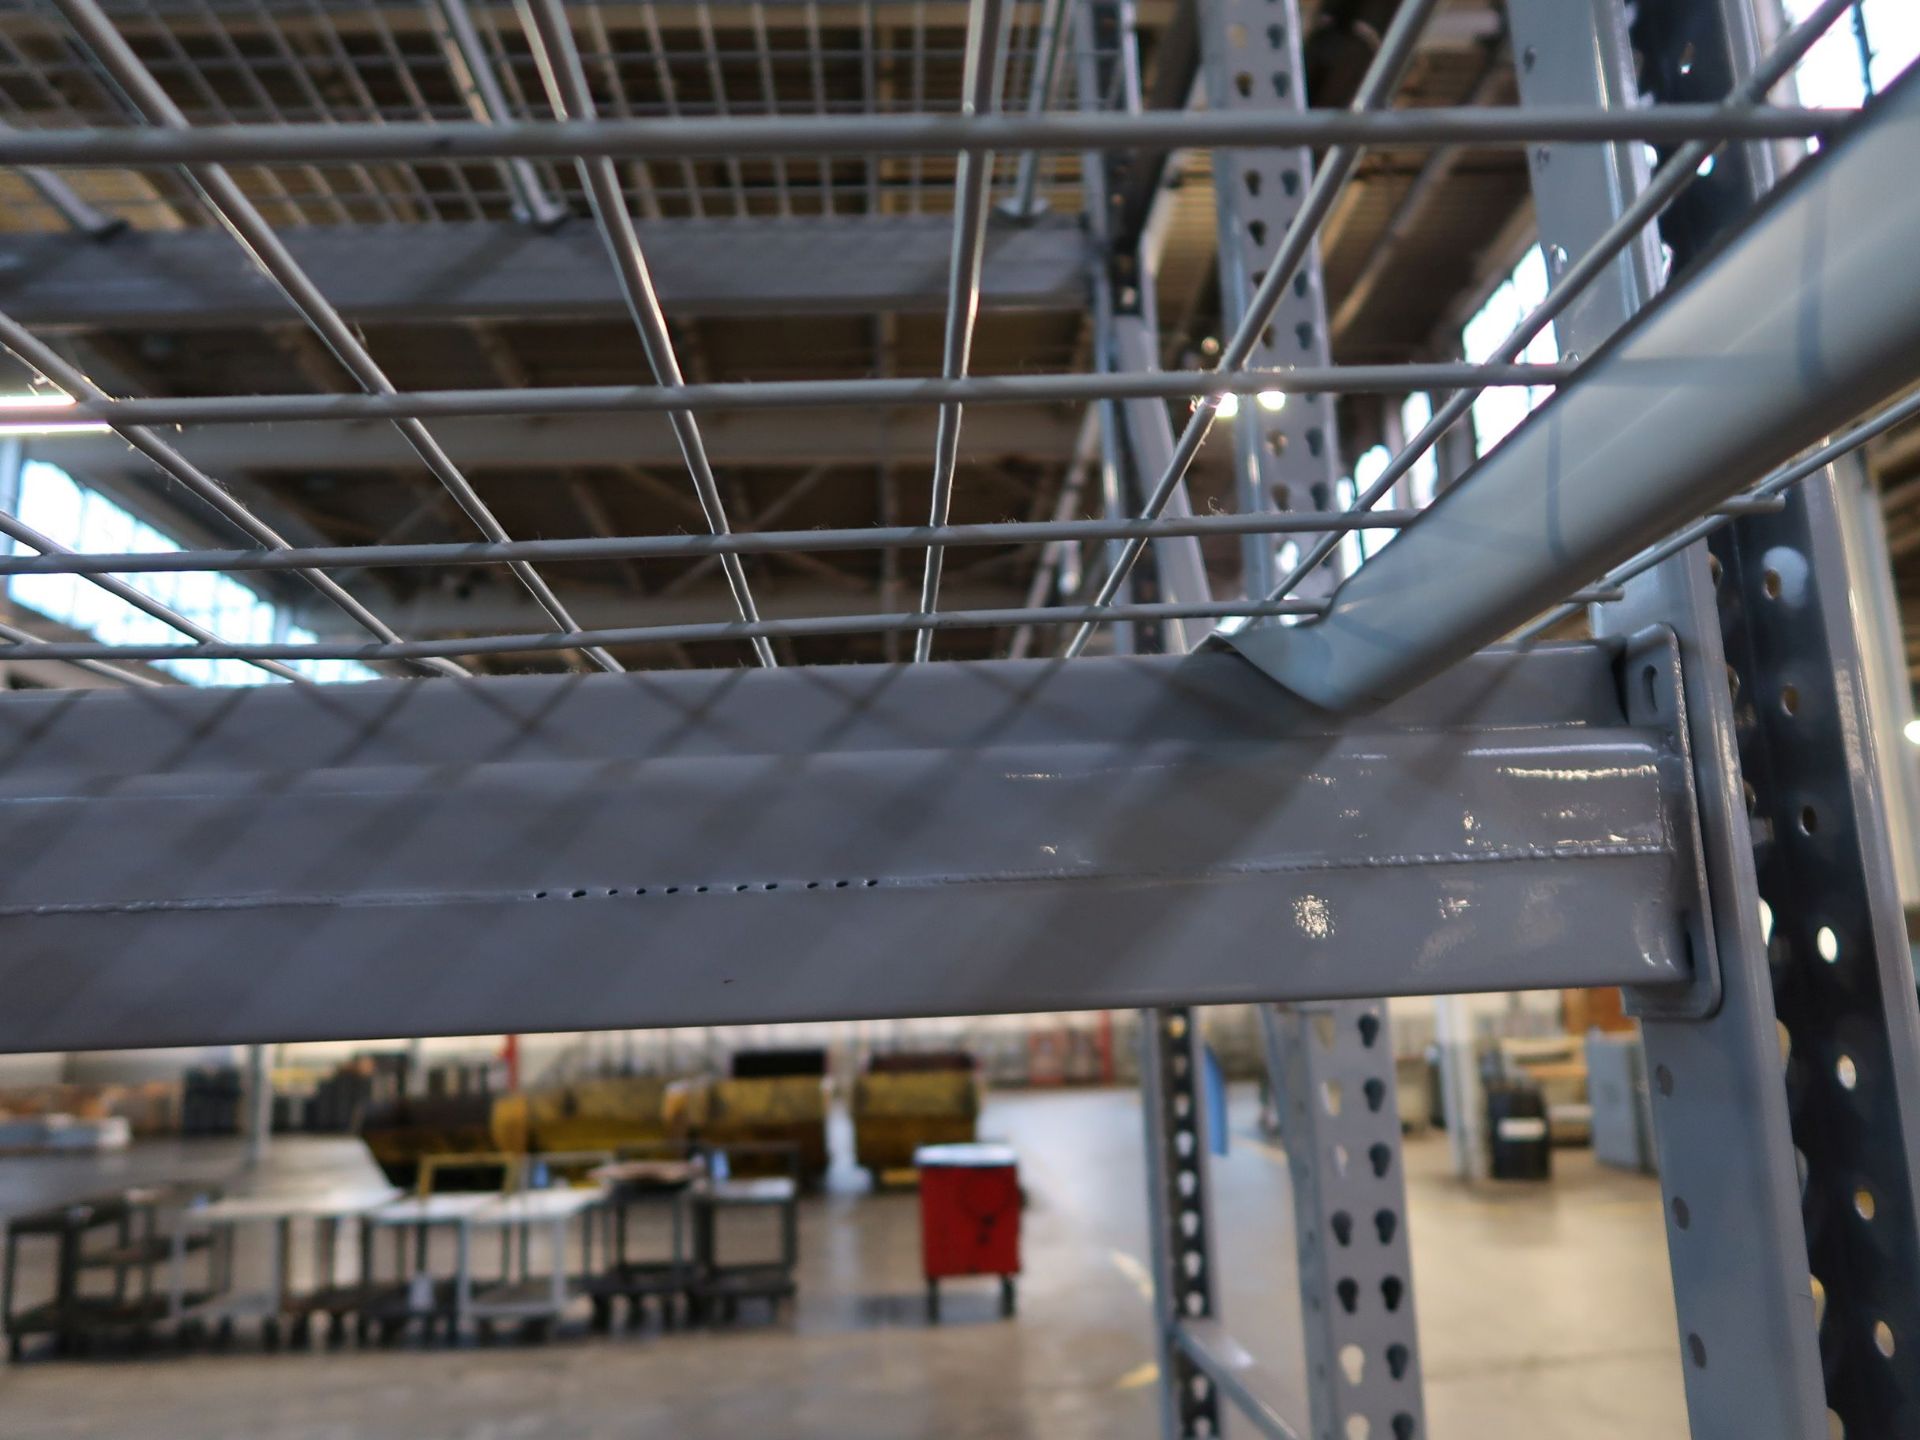 SECTIONS 124" X 32" X 180" TEAR DROP TYPE ADJUSTABLE BEAM PALLET RACKS WITH (7) 32" X 180" UPRIGHTS, - Image 3 of 3